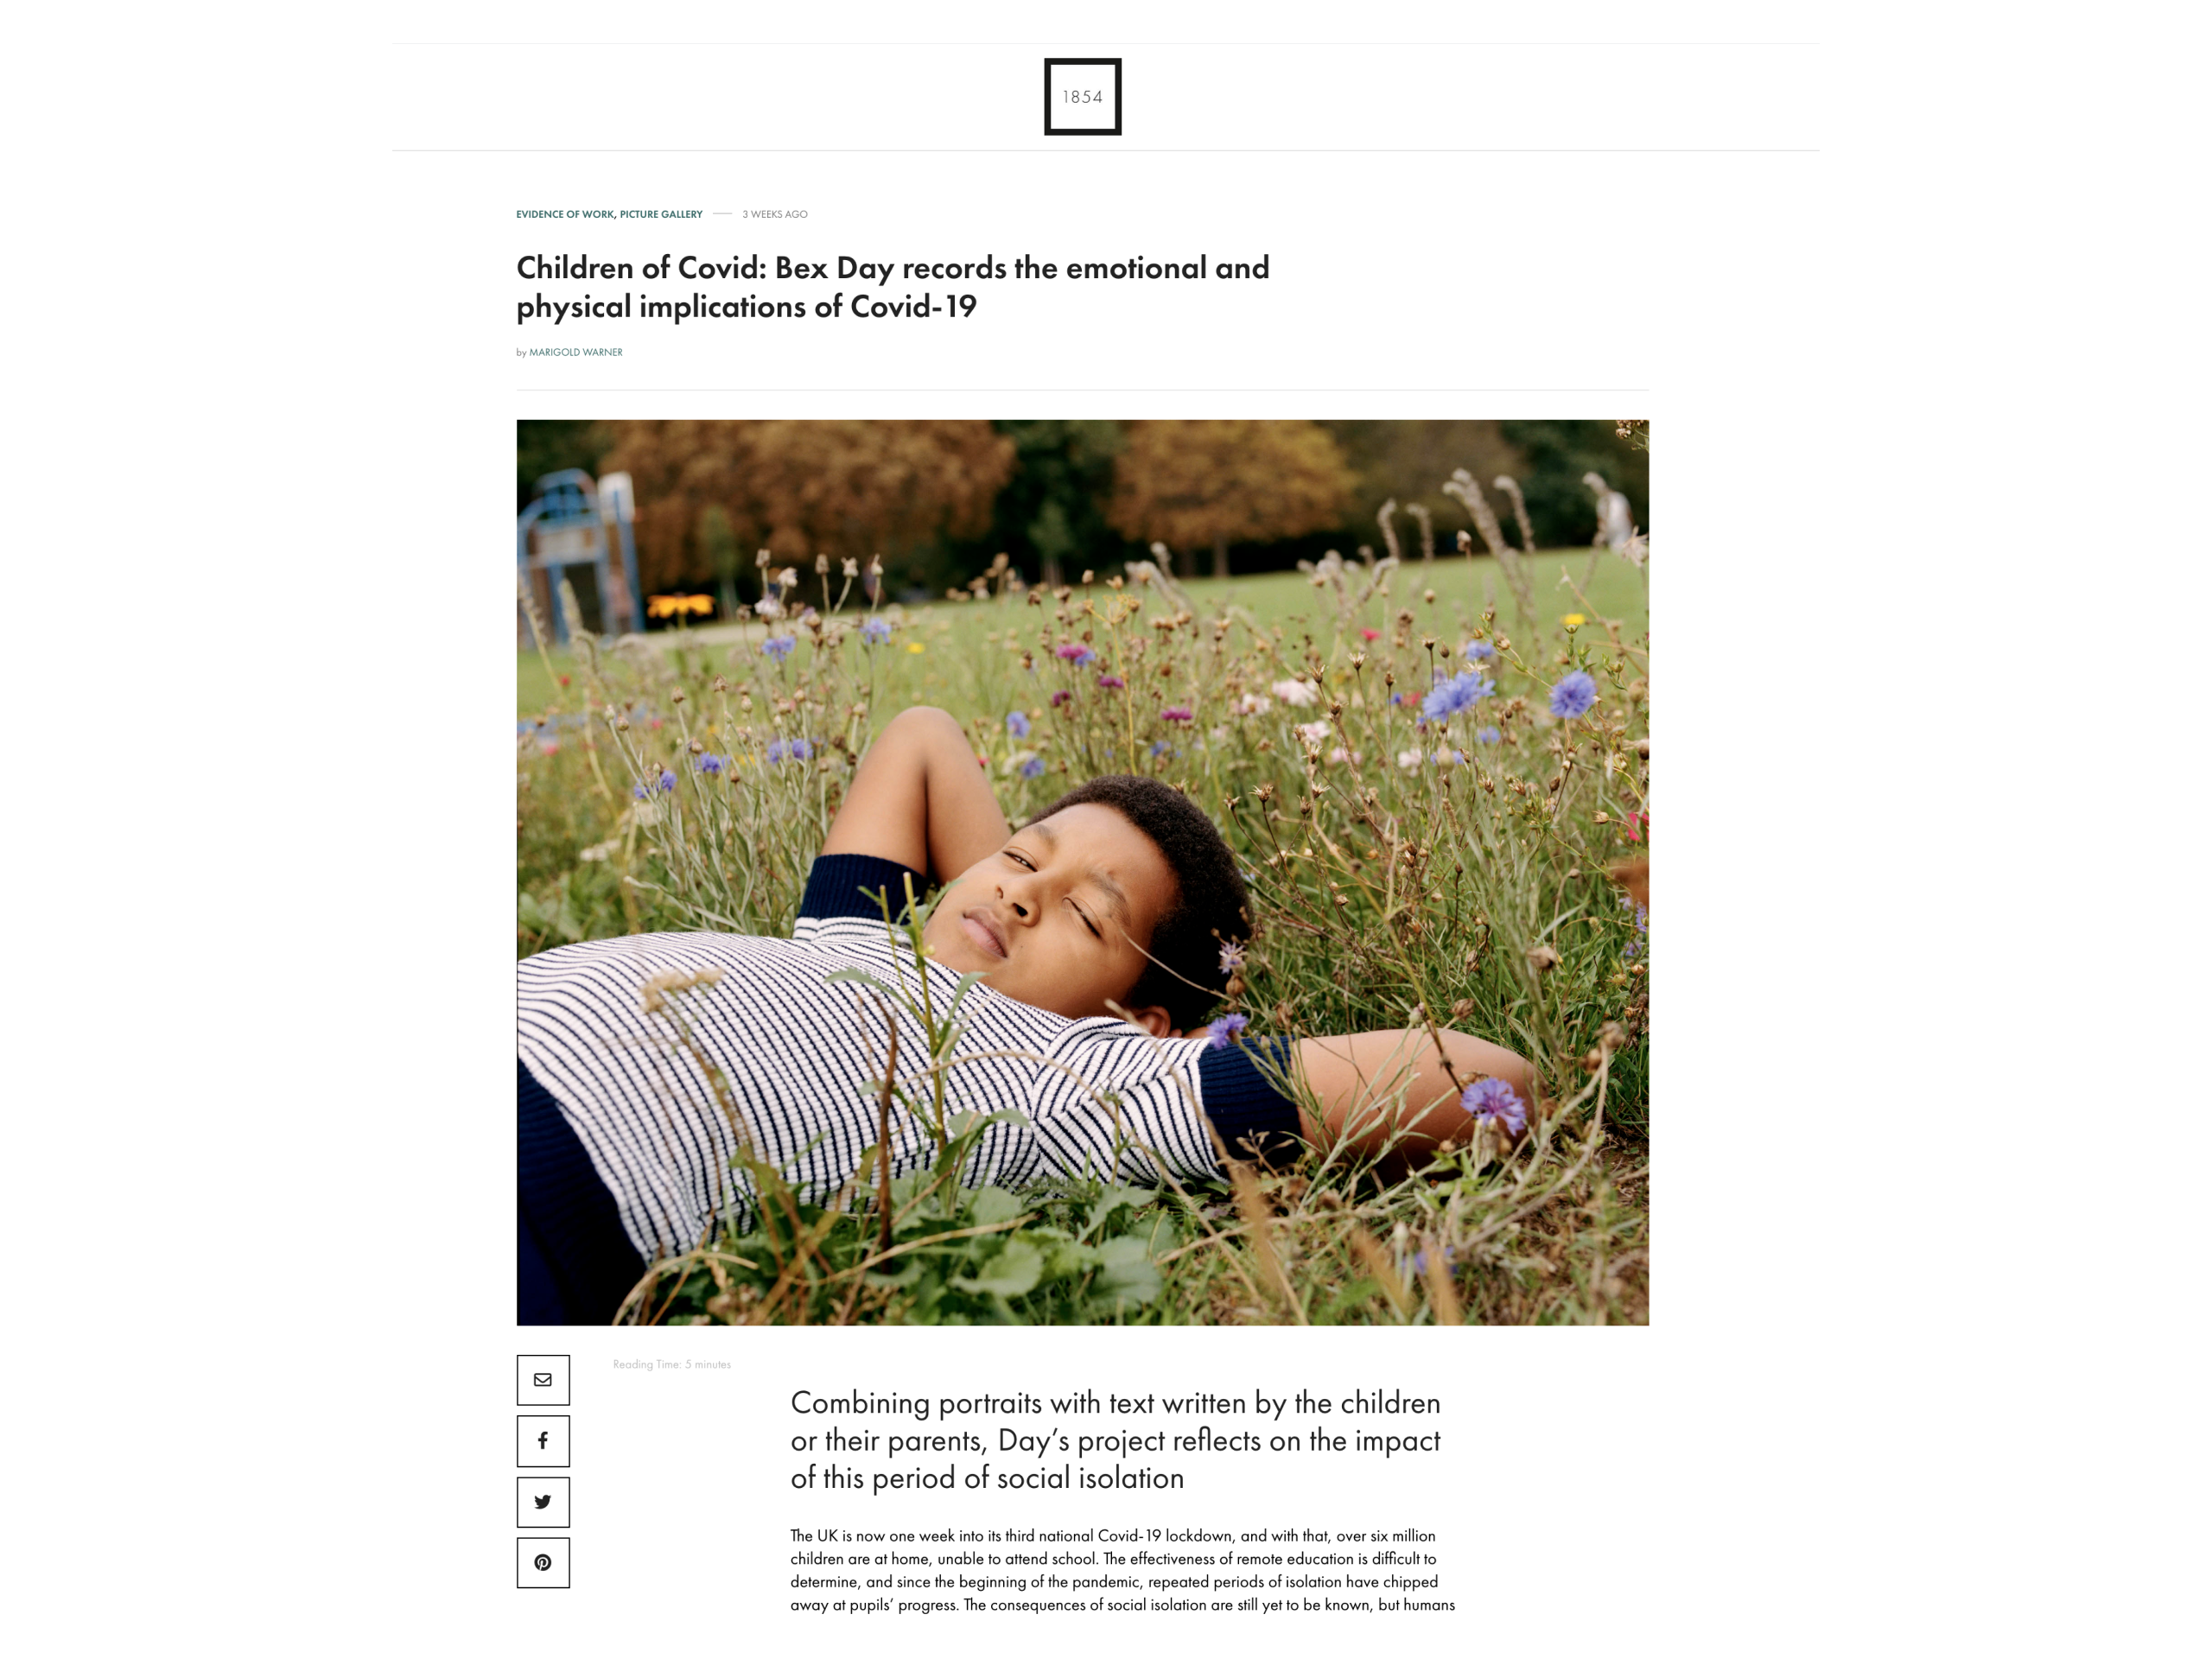 British Journal of Photography featuring Children of Covid by Bex Day